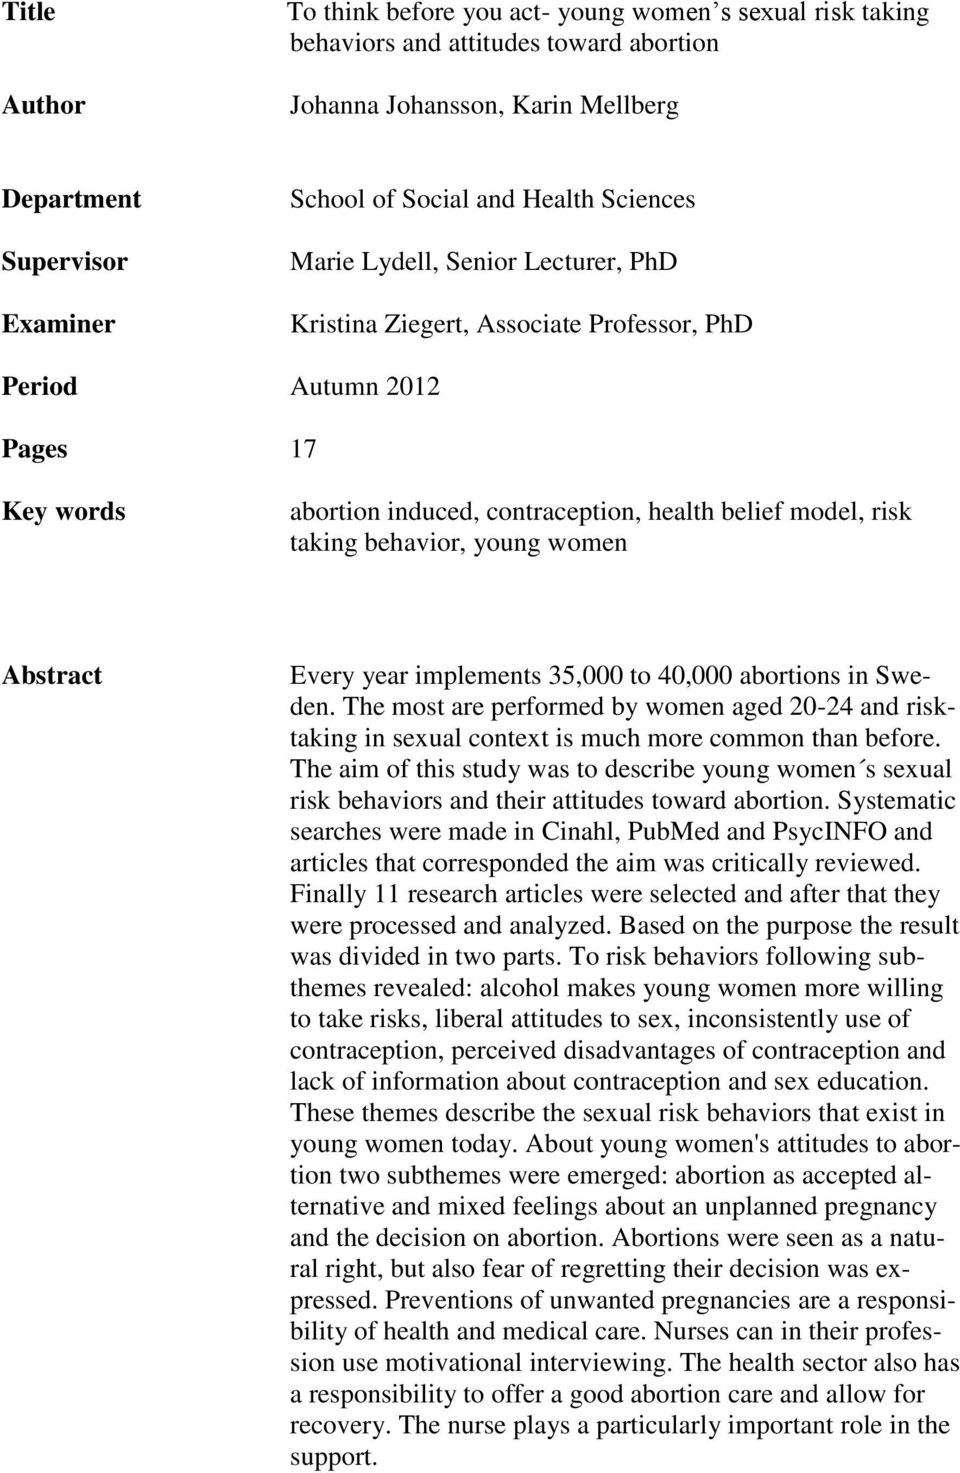 behavior, young women Abstract Every year implements 35,000 to 40,000 abortions in Sweden. The most are performed by women aged 20-24 and risktaking in sexual context is much more common than before.